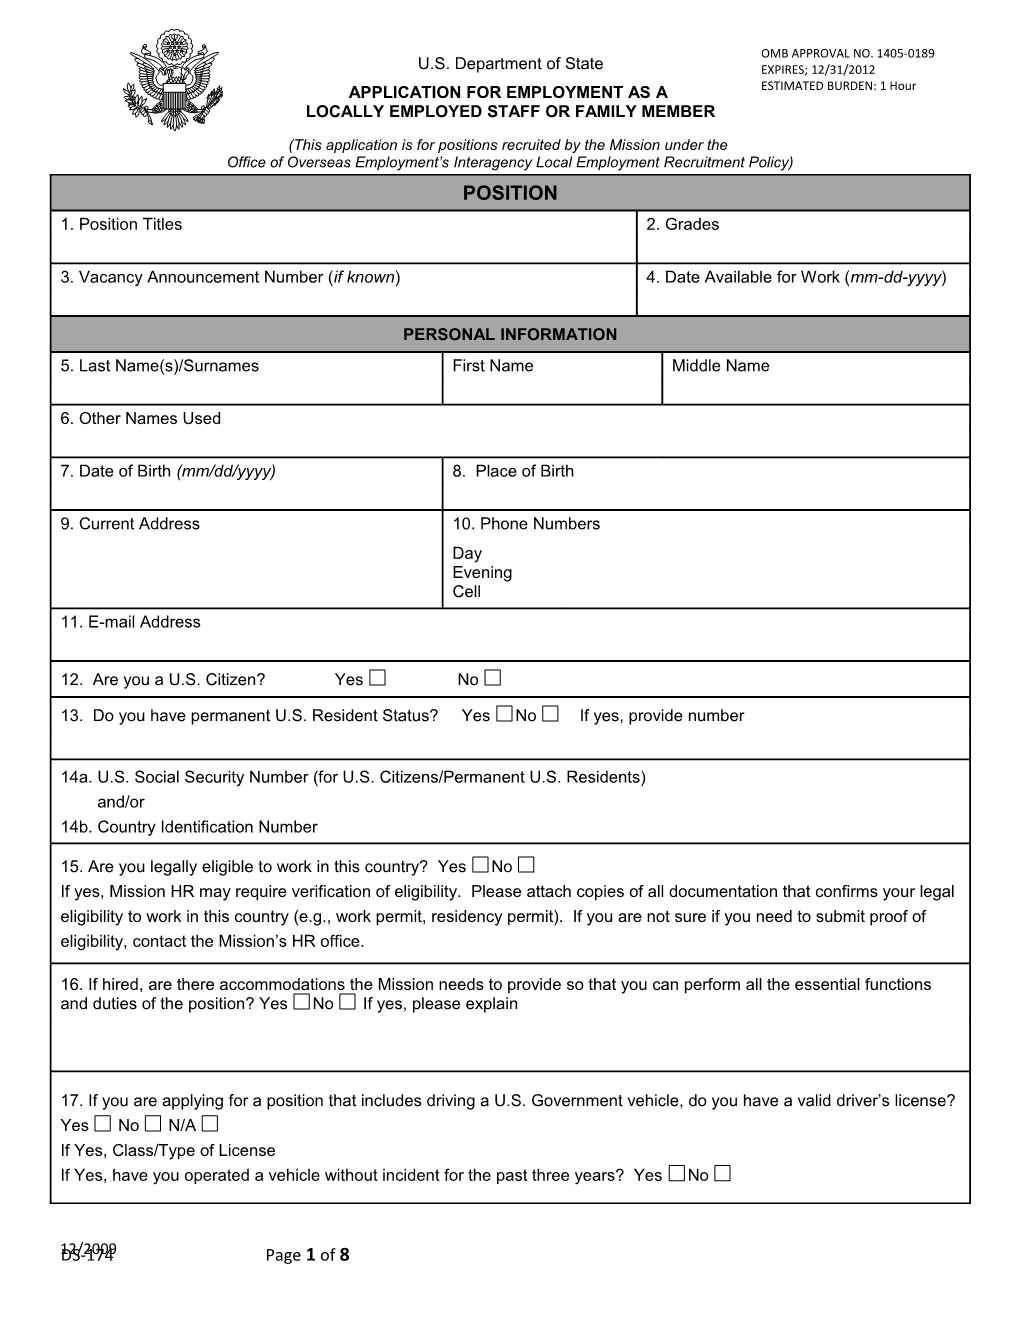 Application for Employment As a Locally Employed Staff Or Family Member